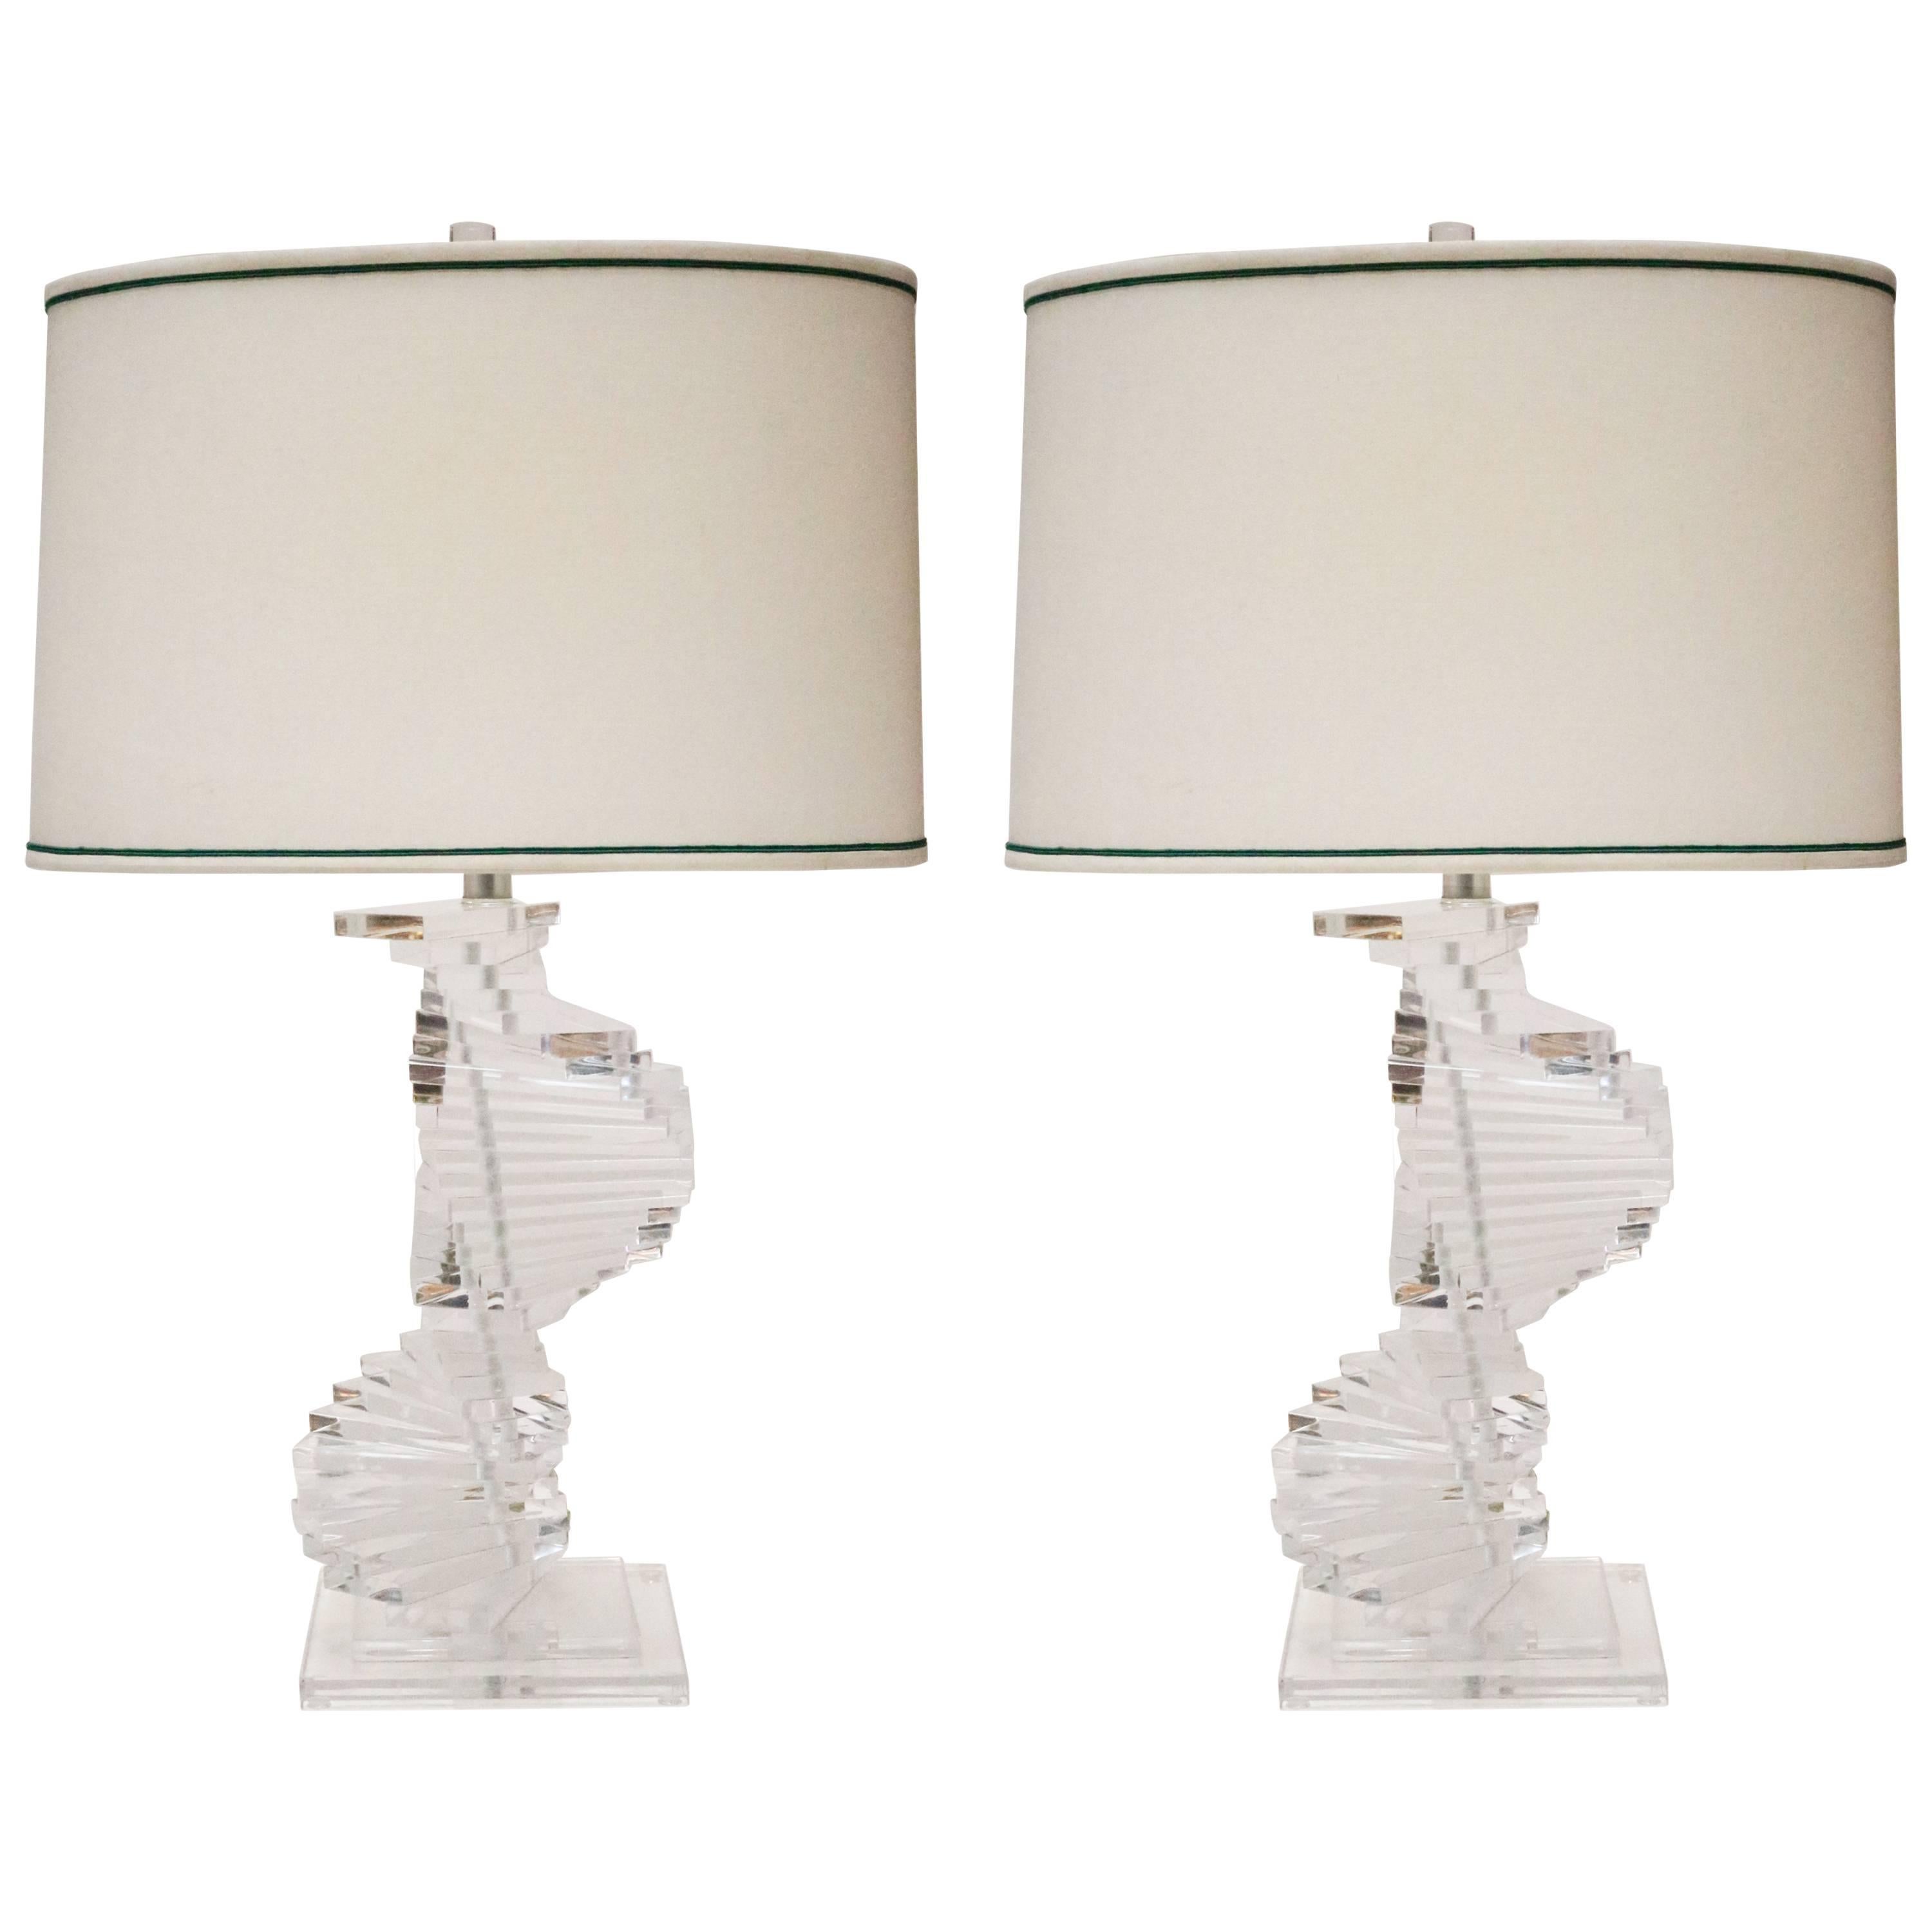 Helix Shaped Stepped Lucite Table Lamps, Pair